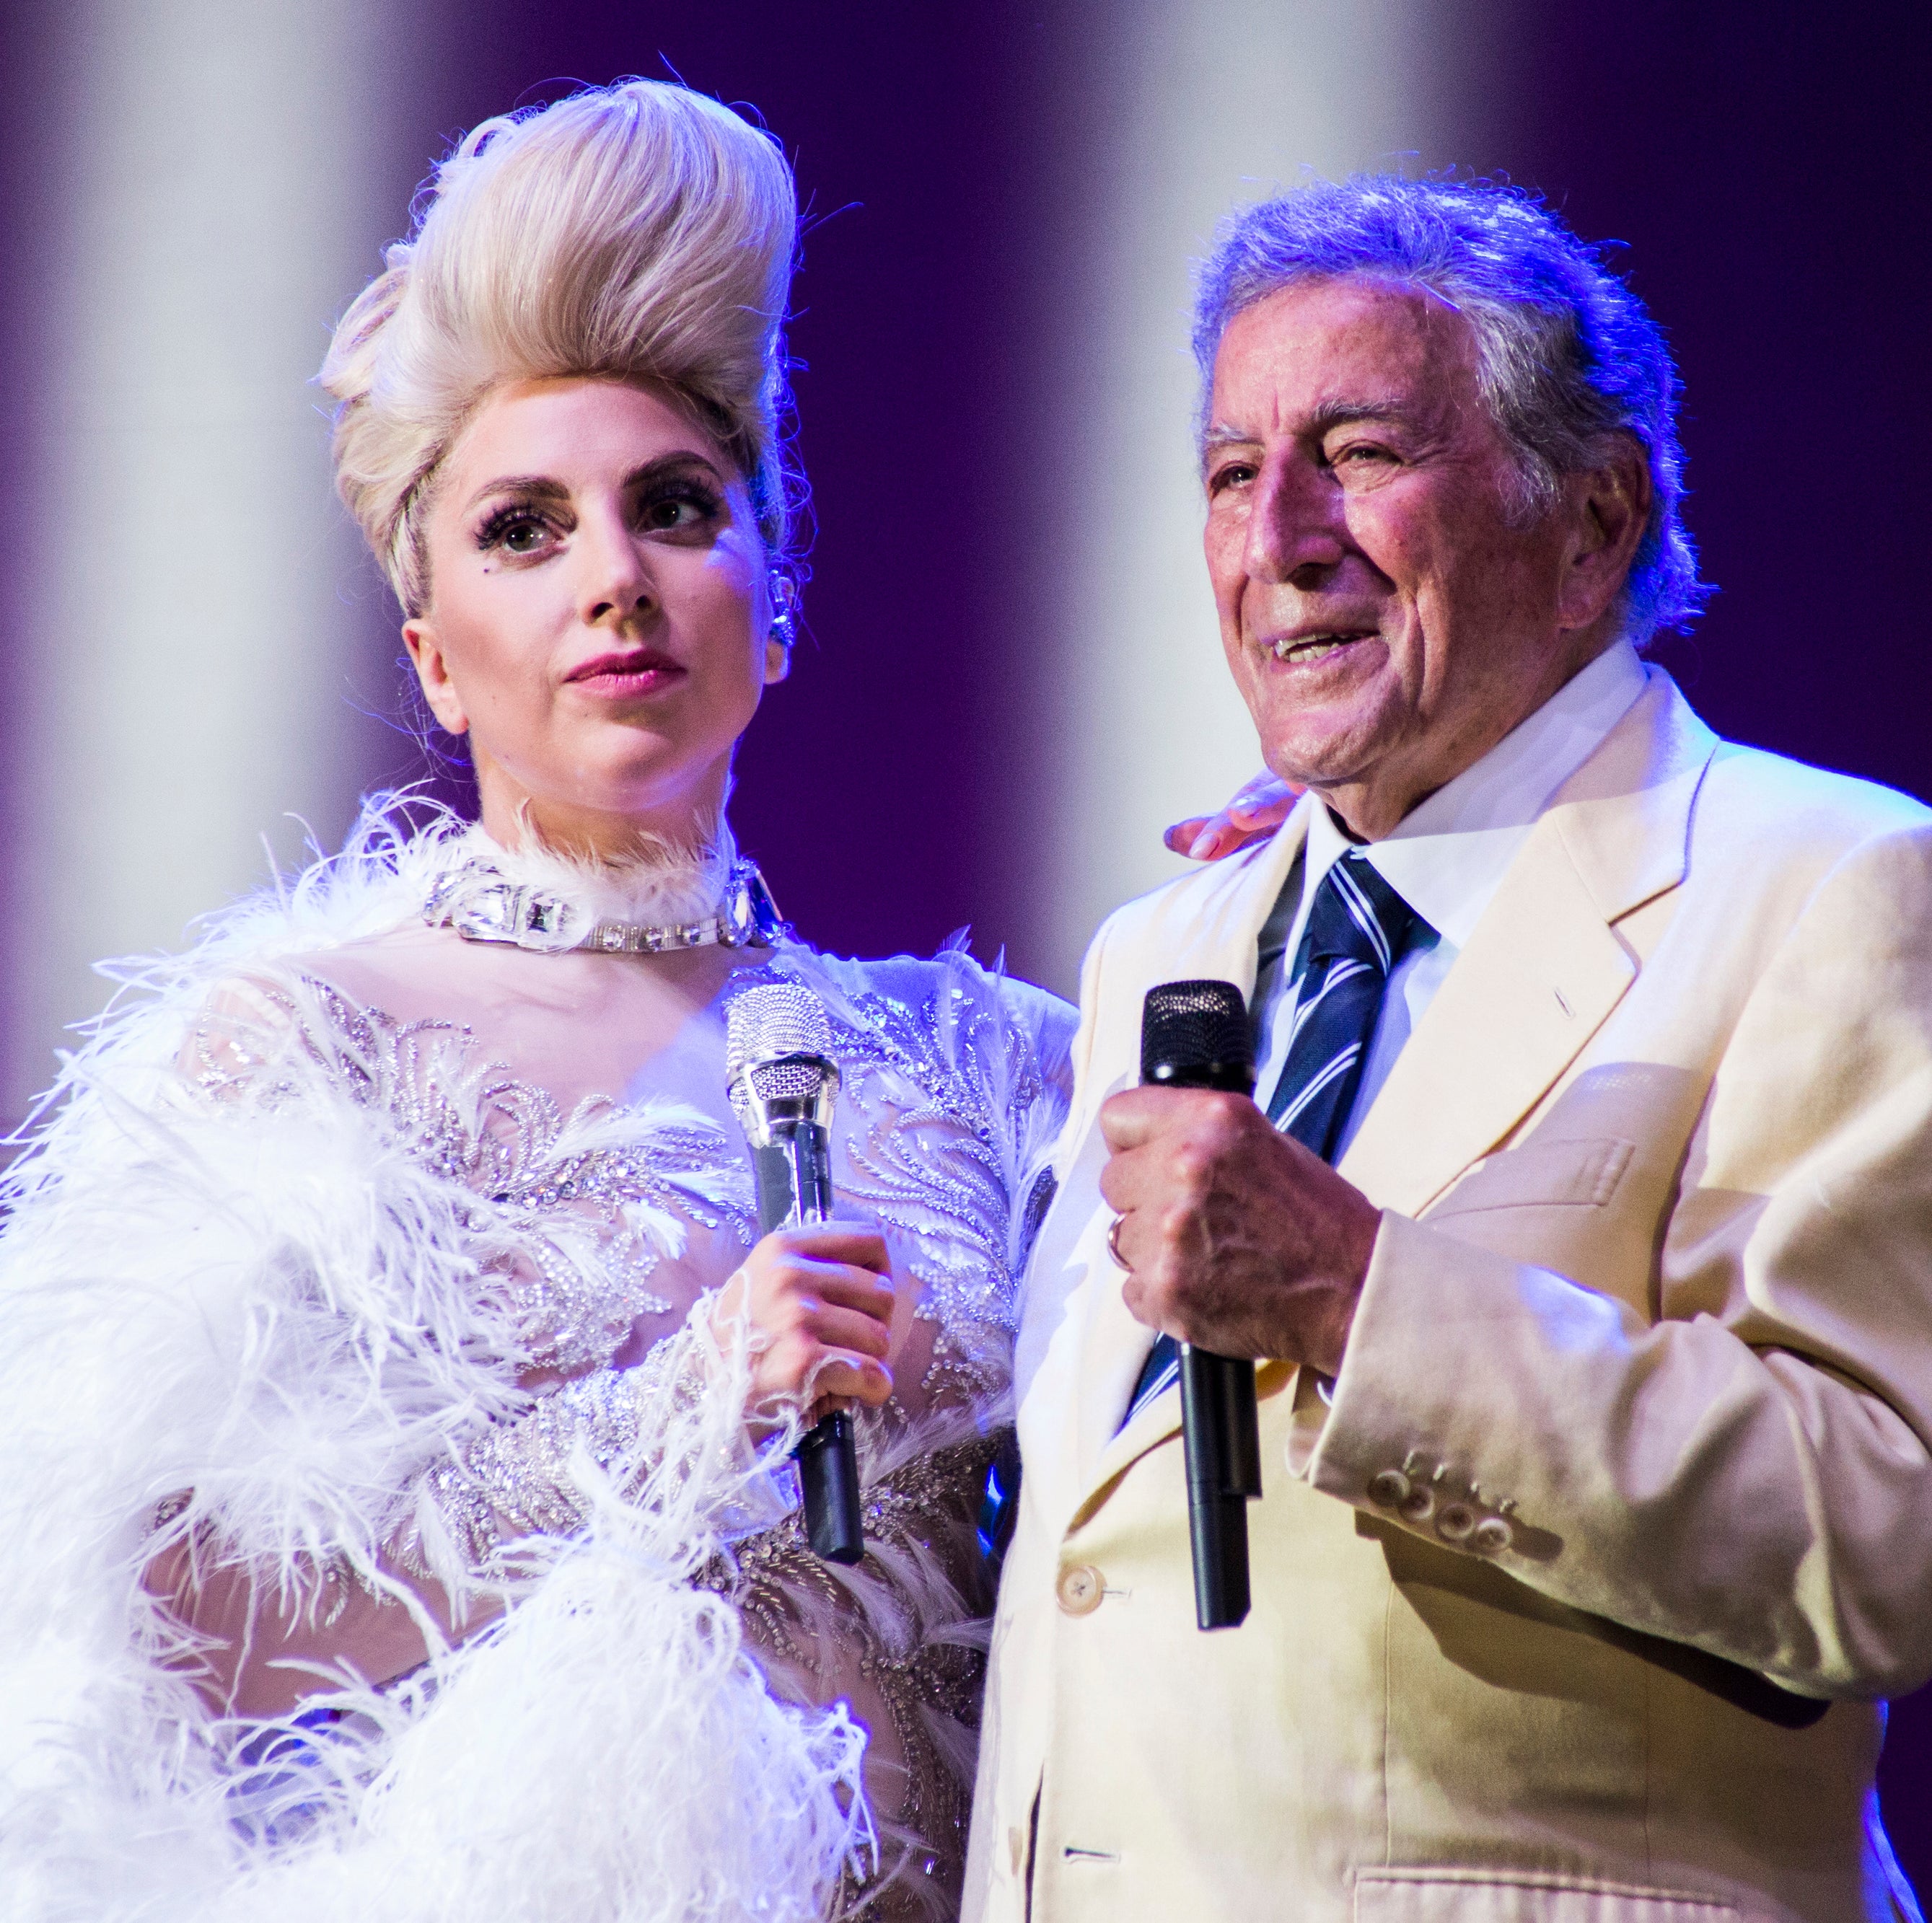 Gaga and Tony onstage holding microphones